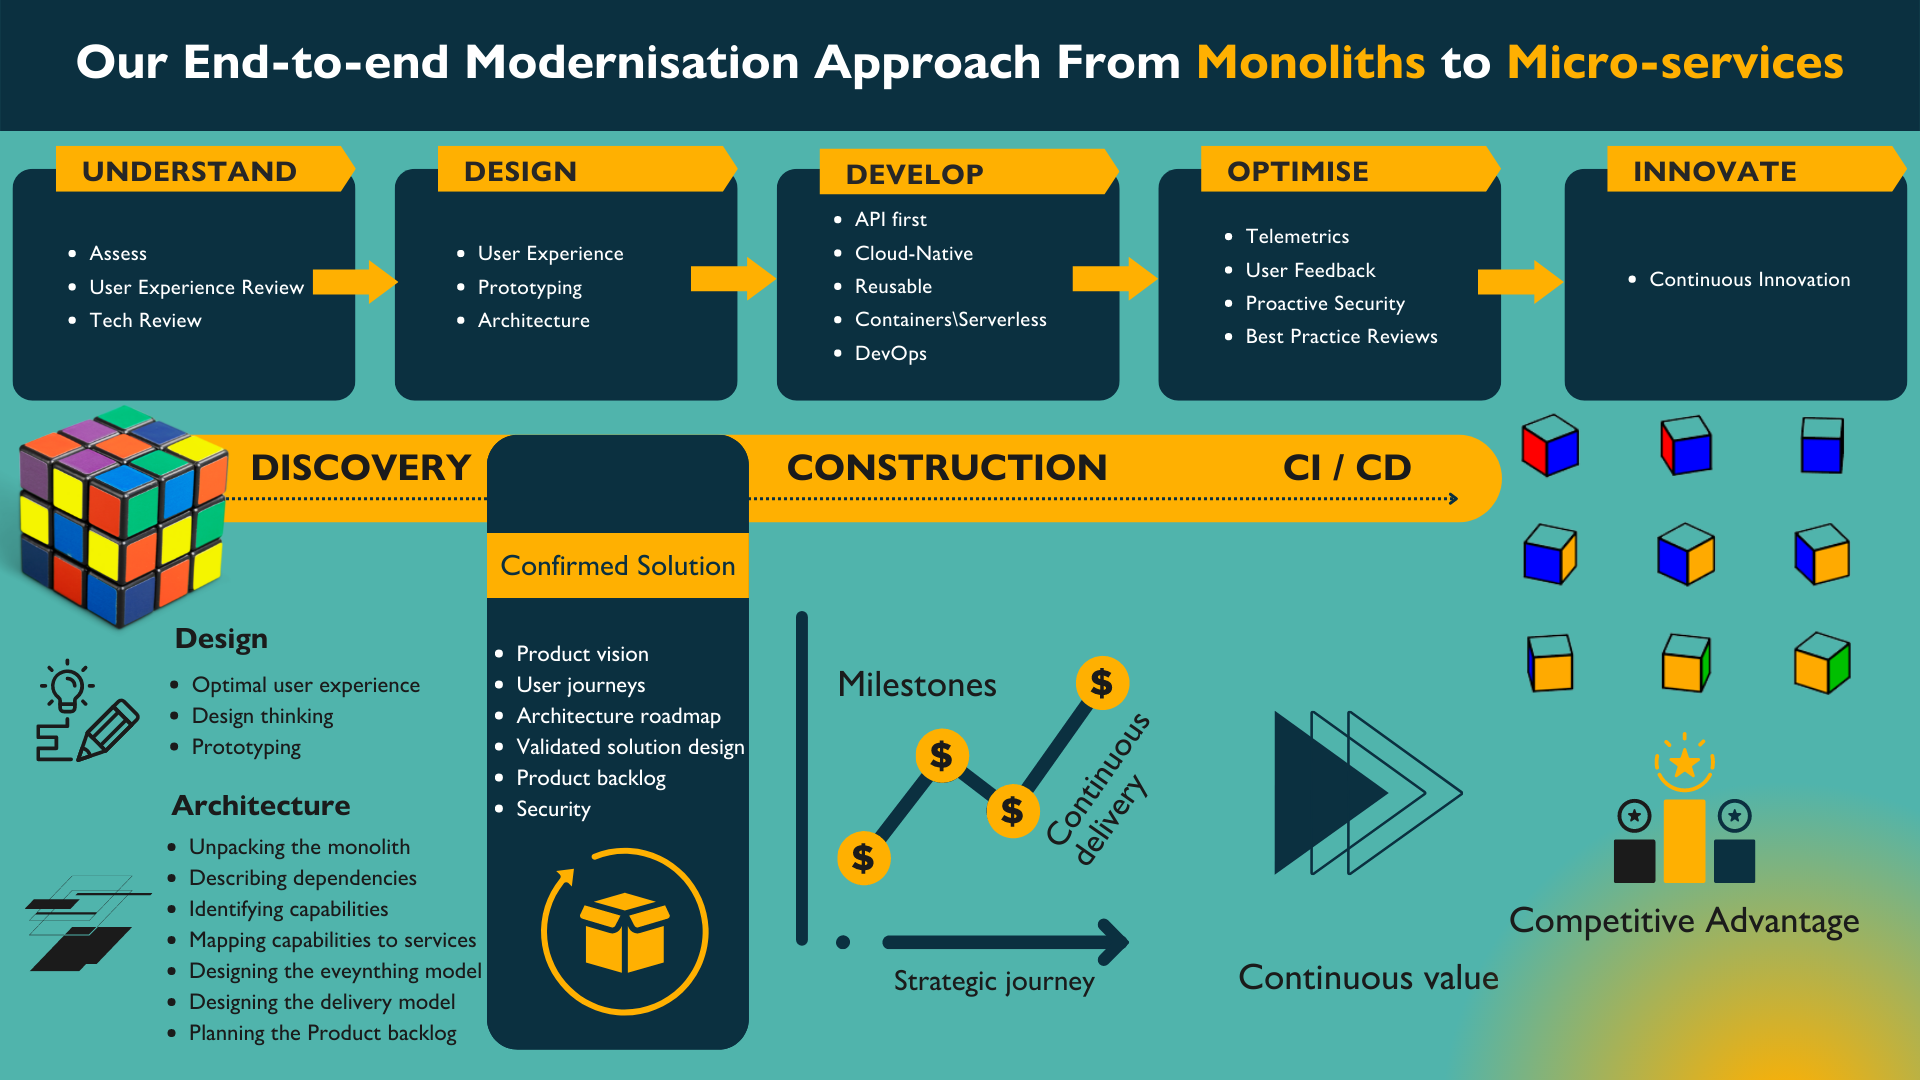 From monoliths to microservices